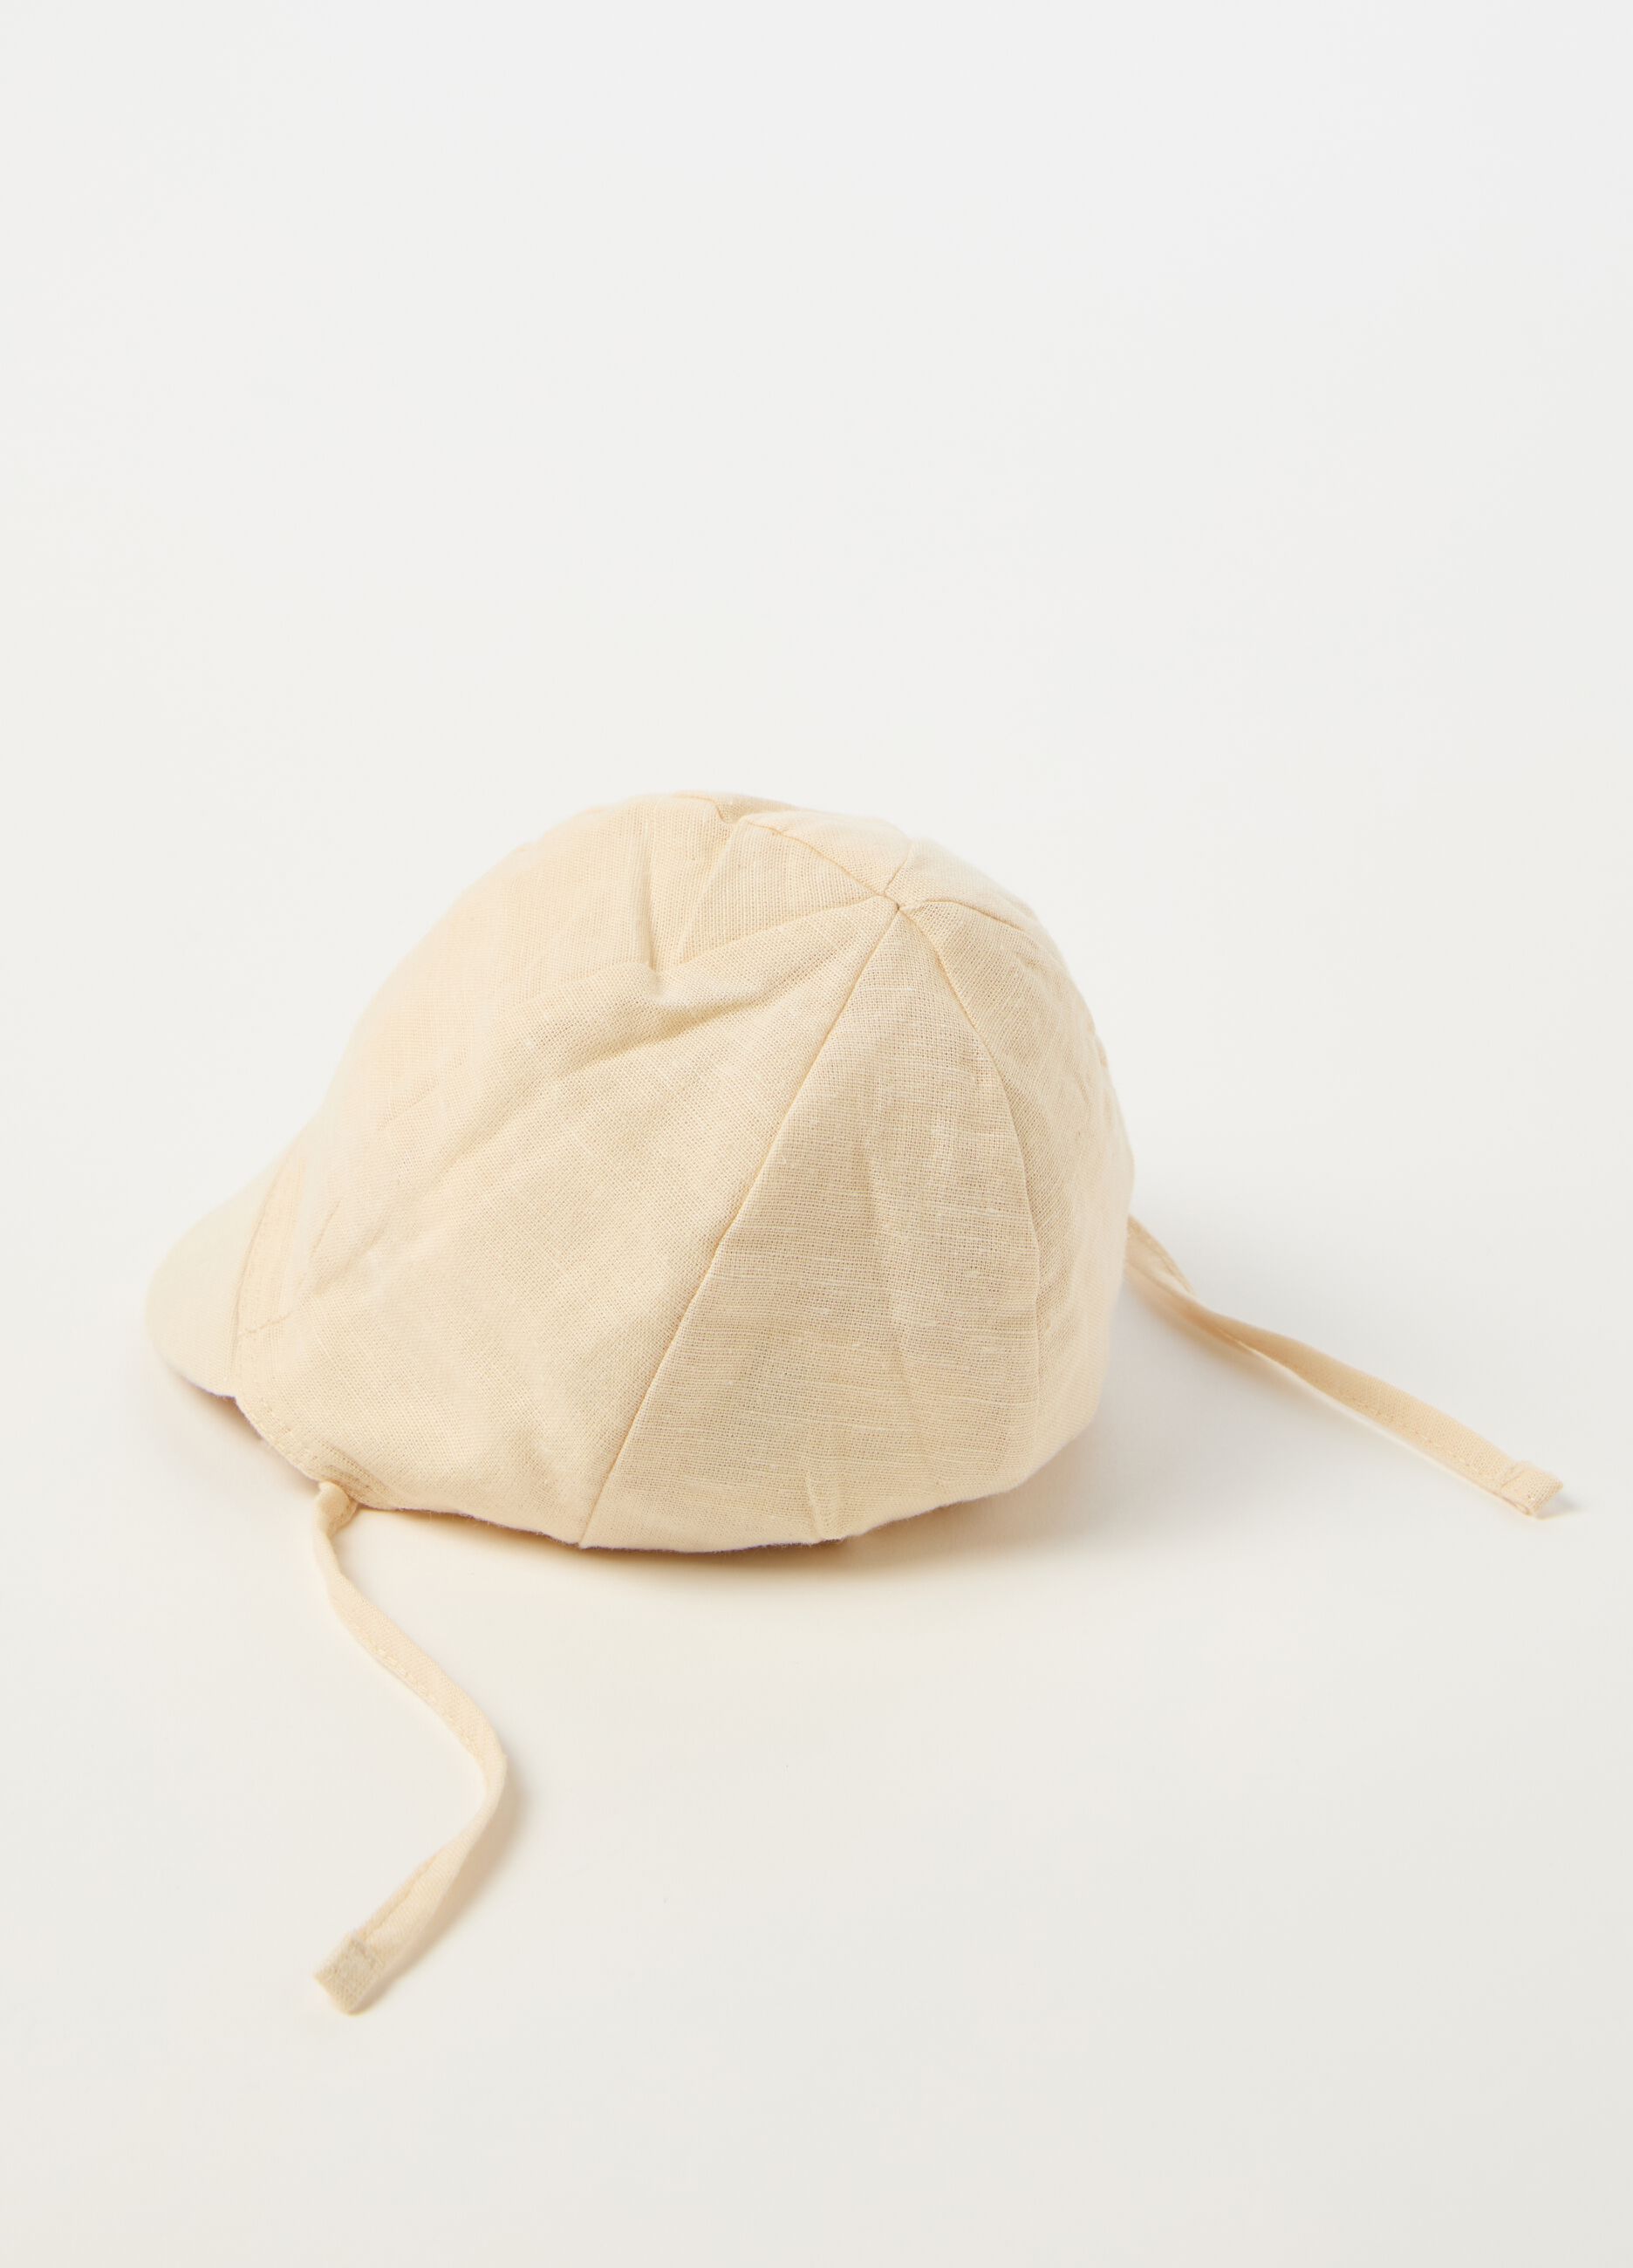 Aviator hat in cotton and linen